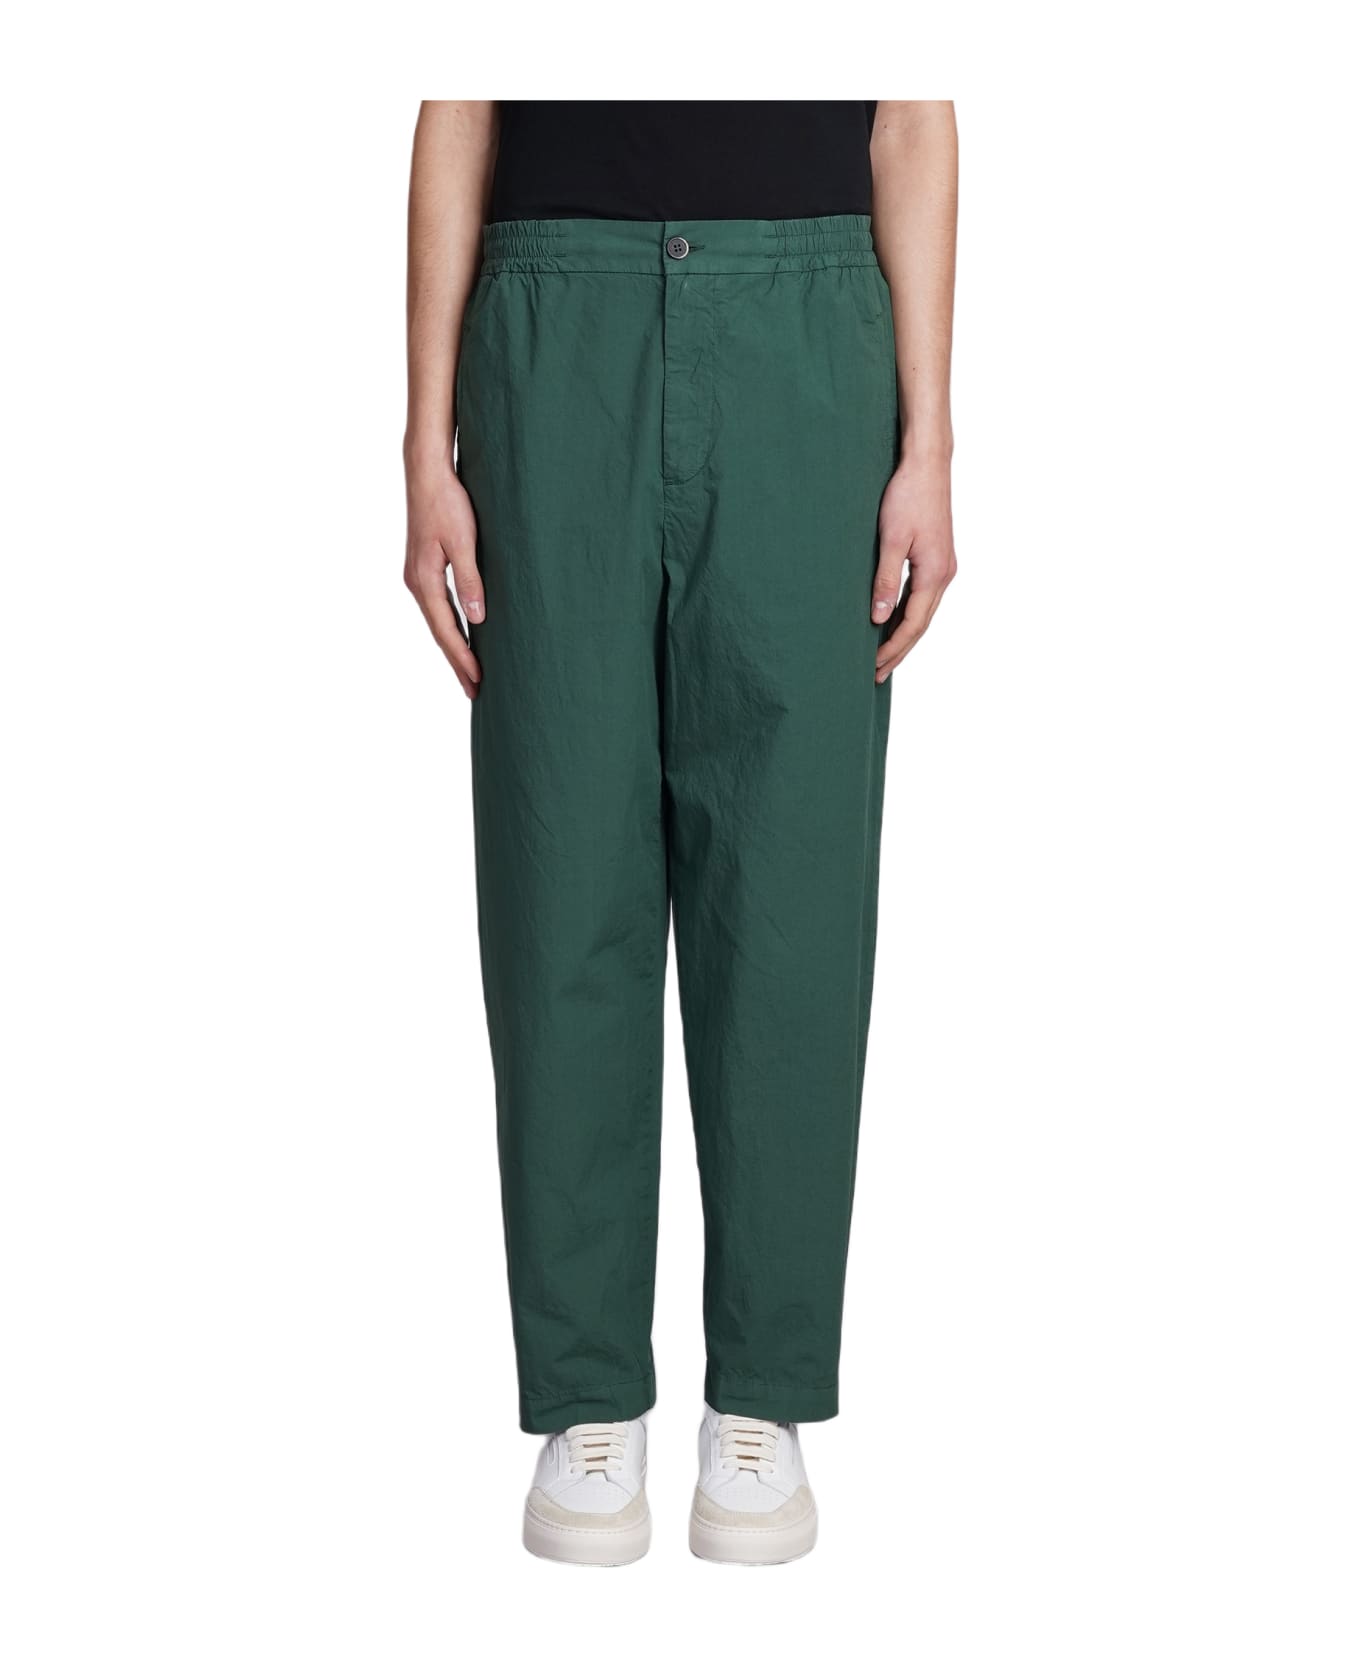 Barena Ameo Pants In Green Cotton - green